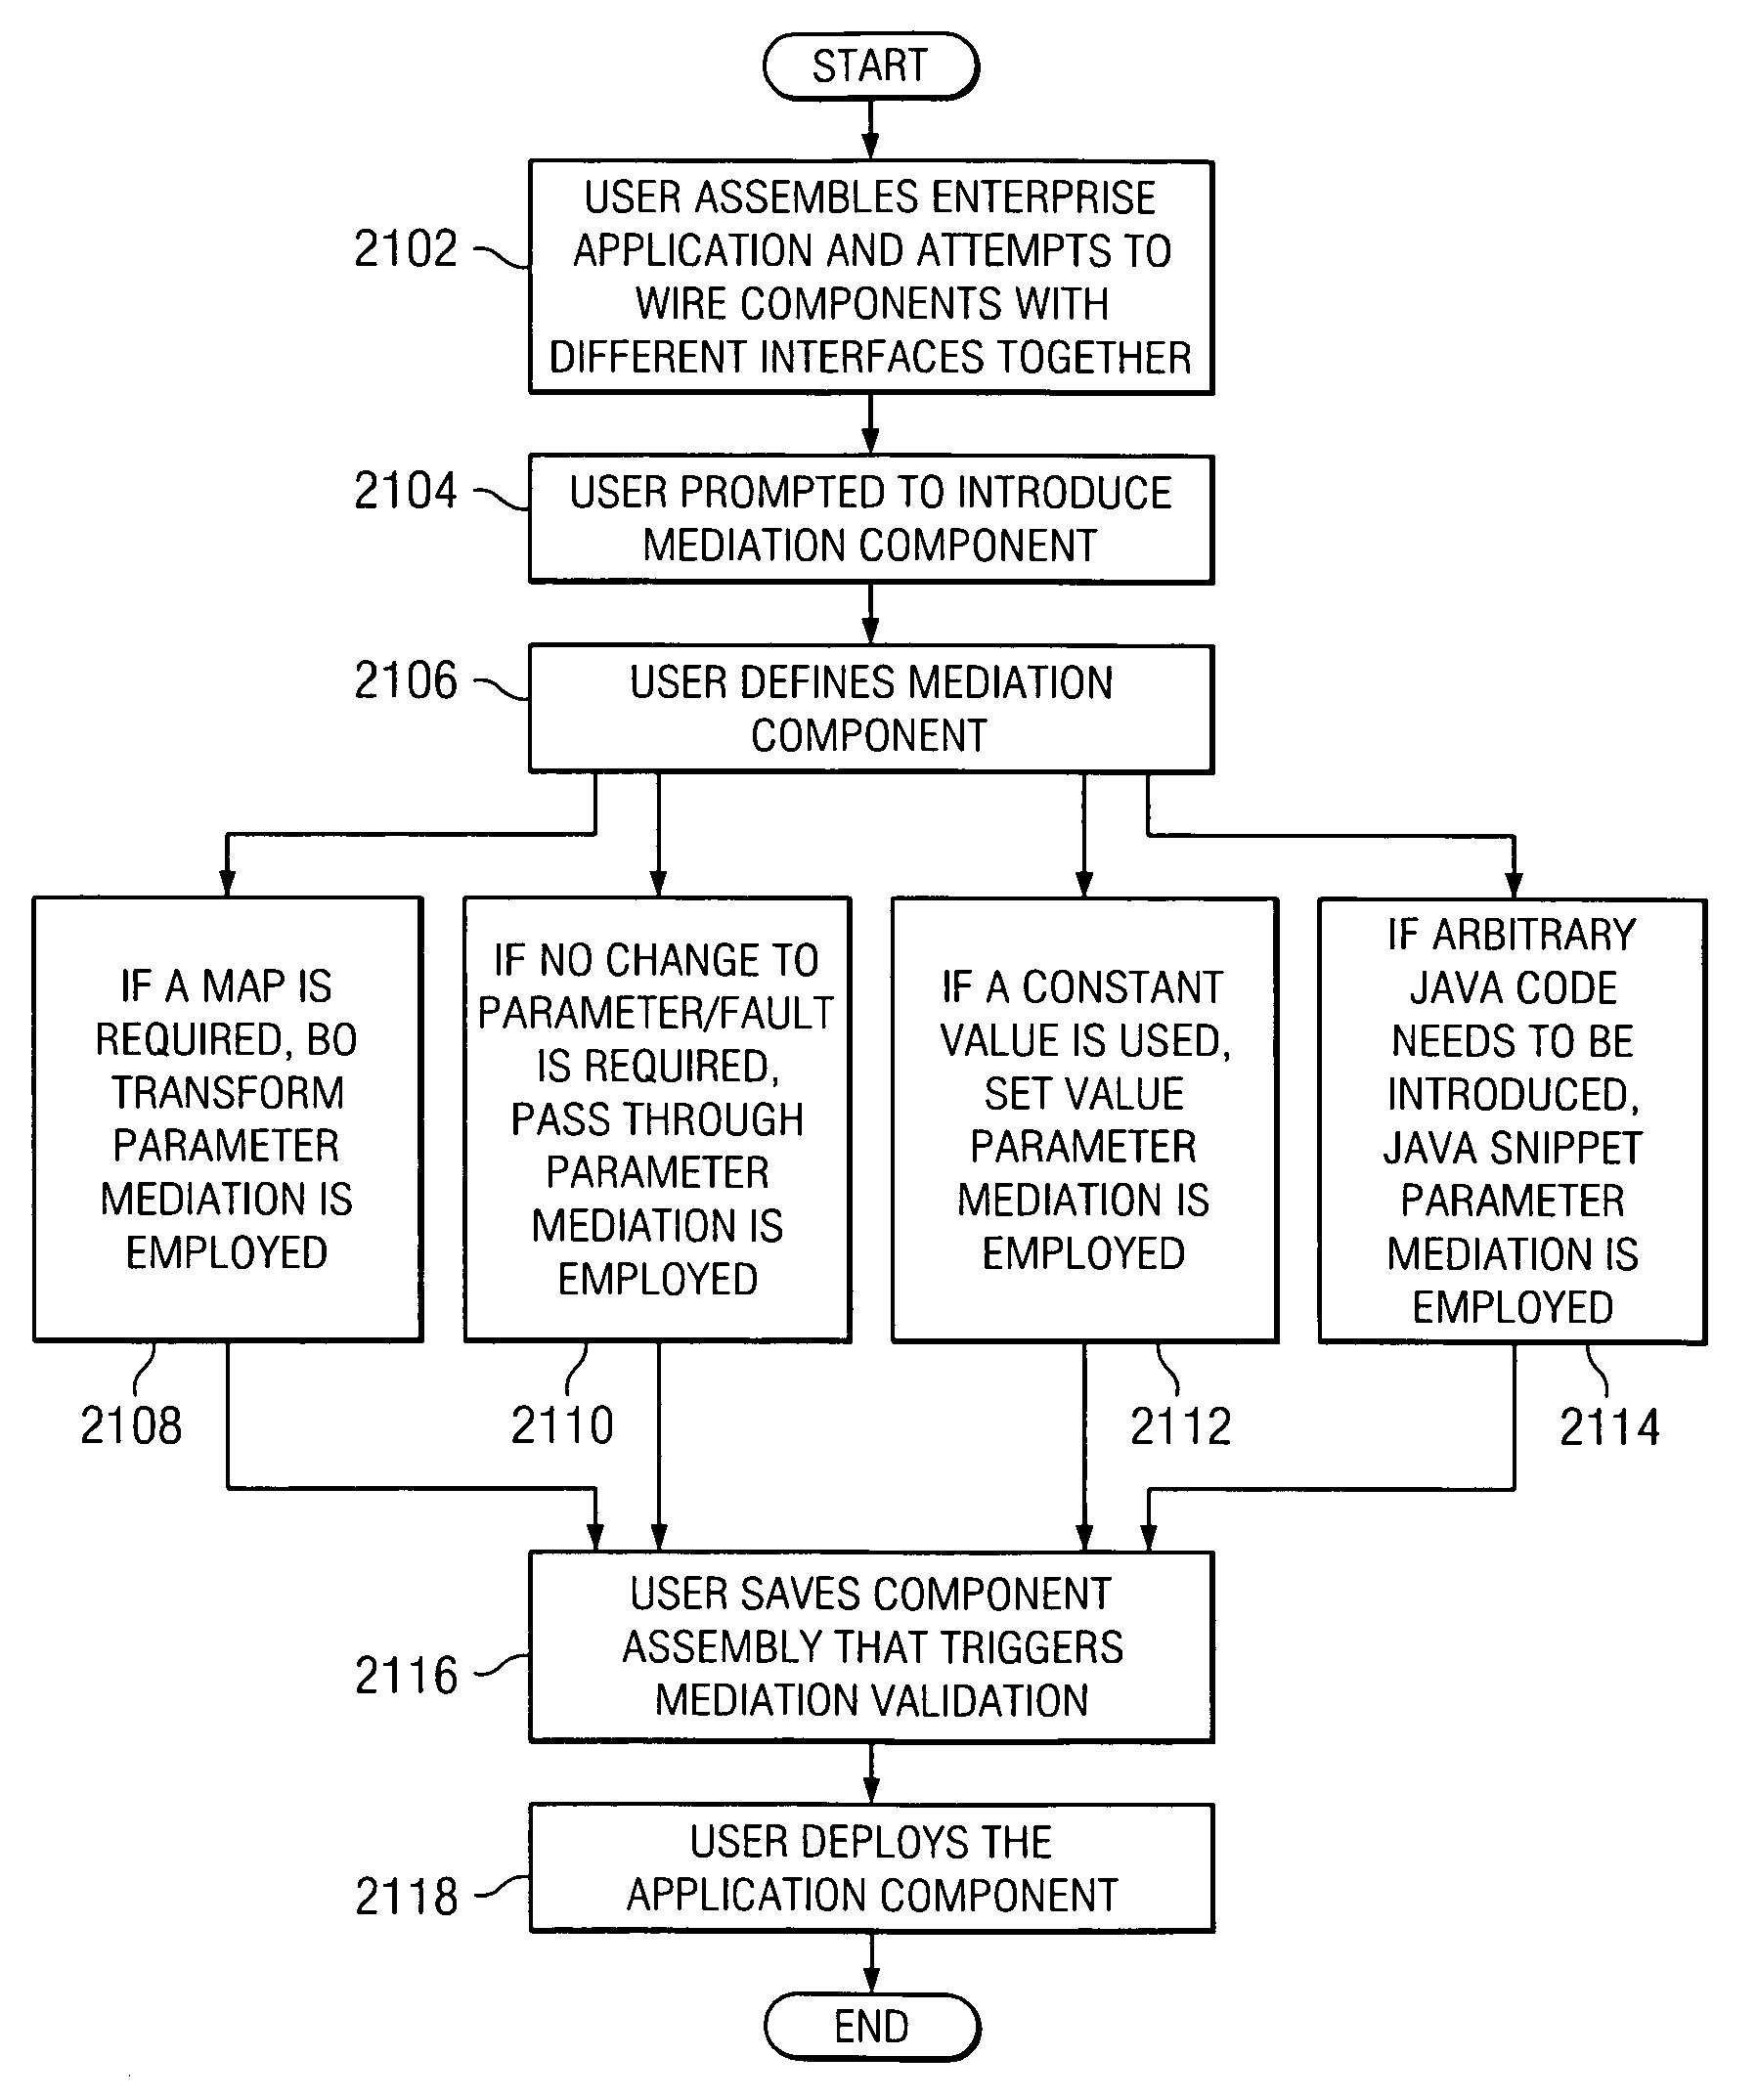 Generic framework for integrating components with different interfaces in an enterprise application integration environment